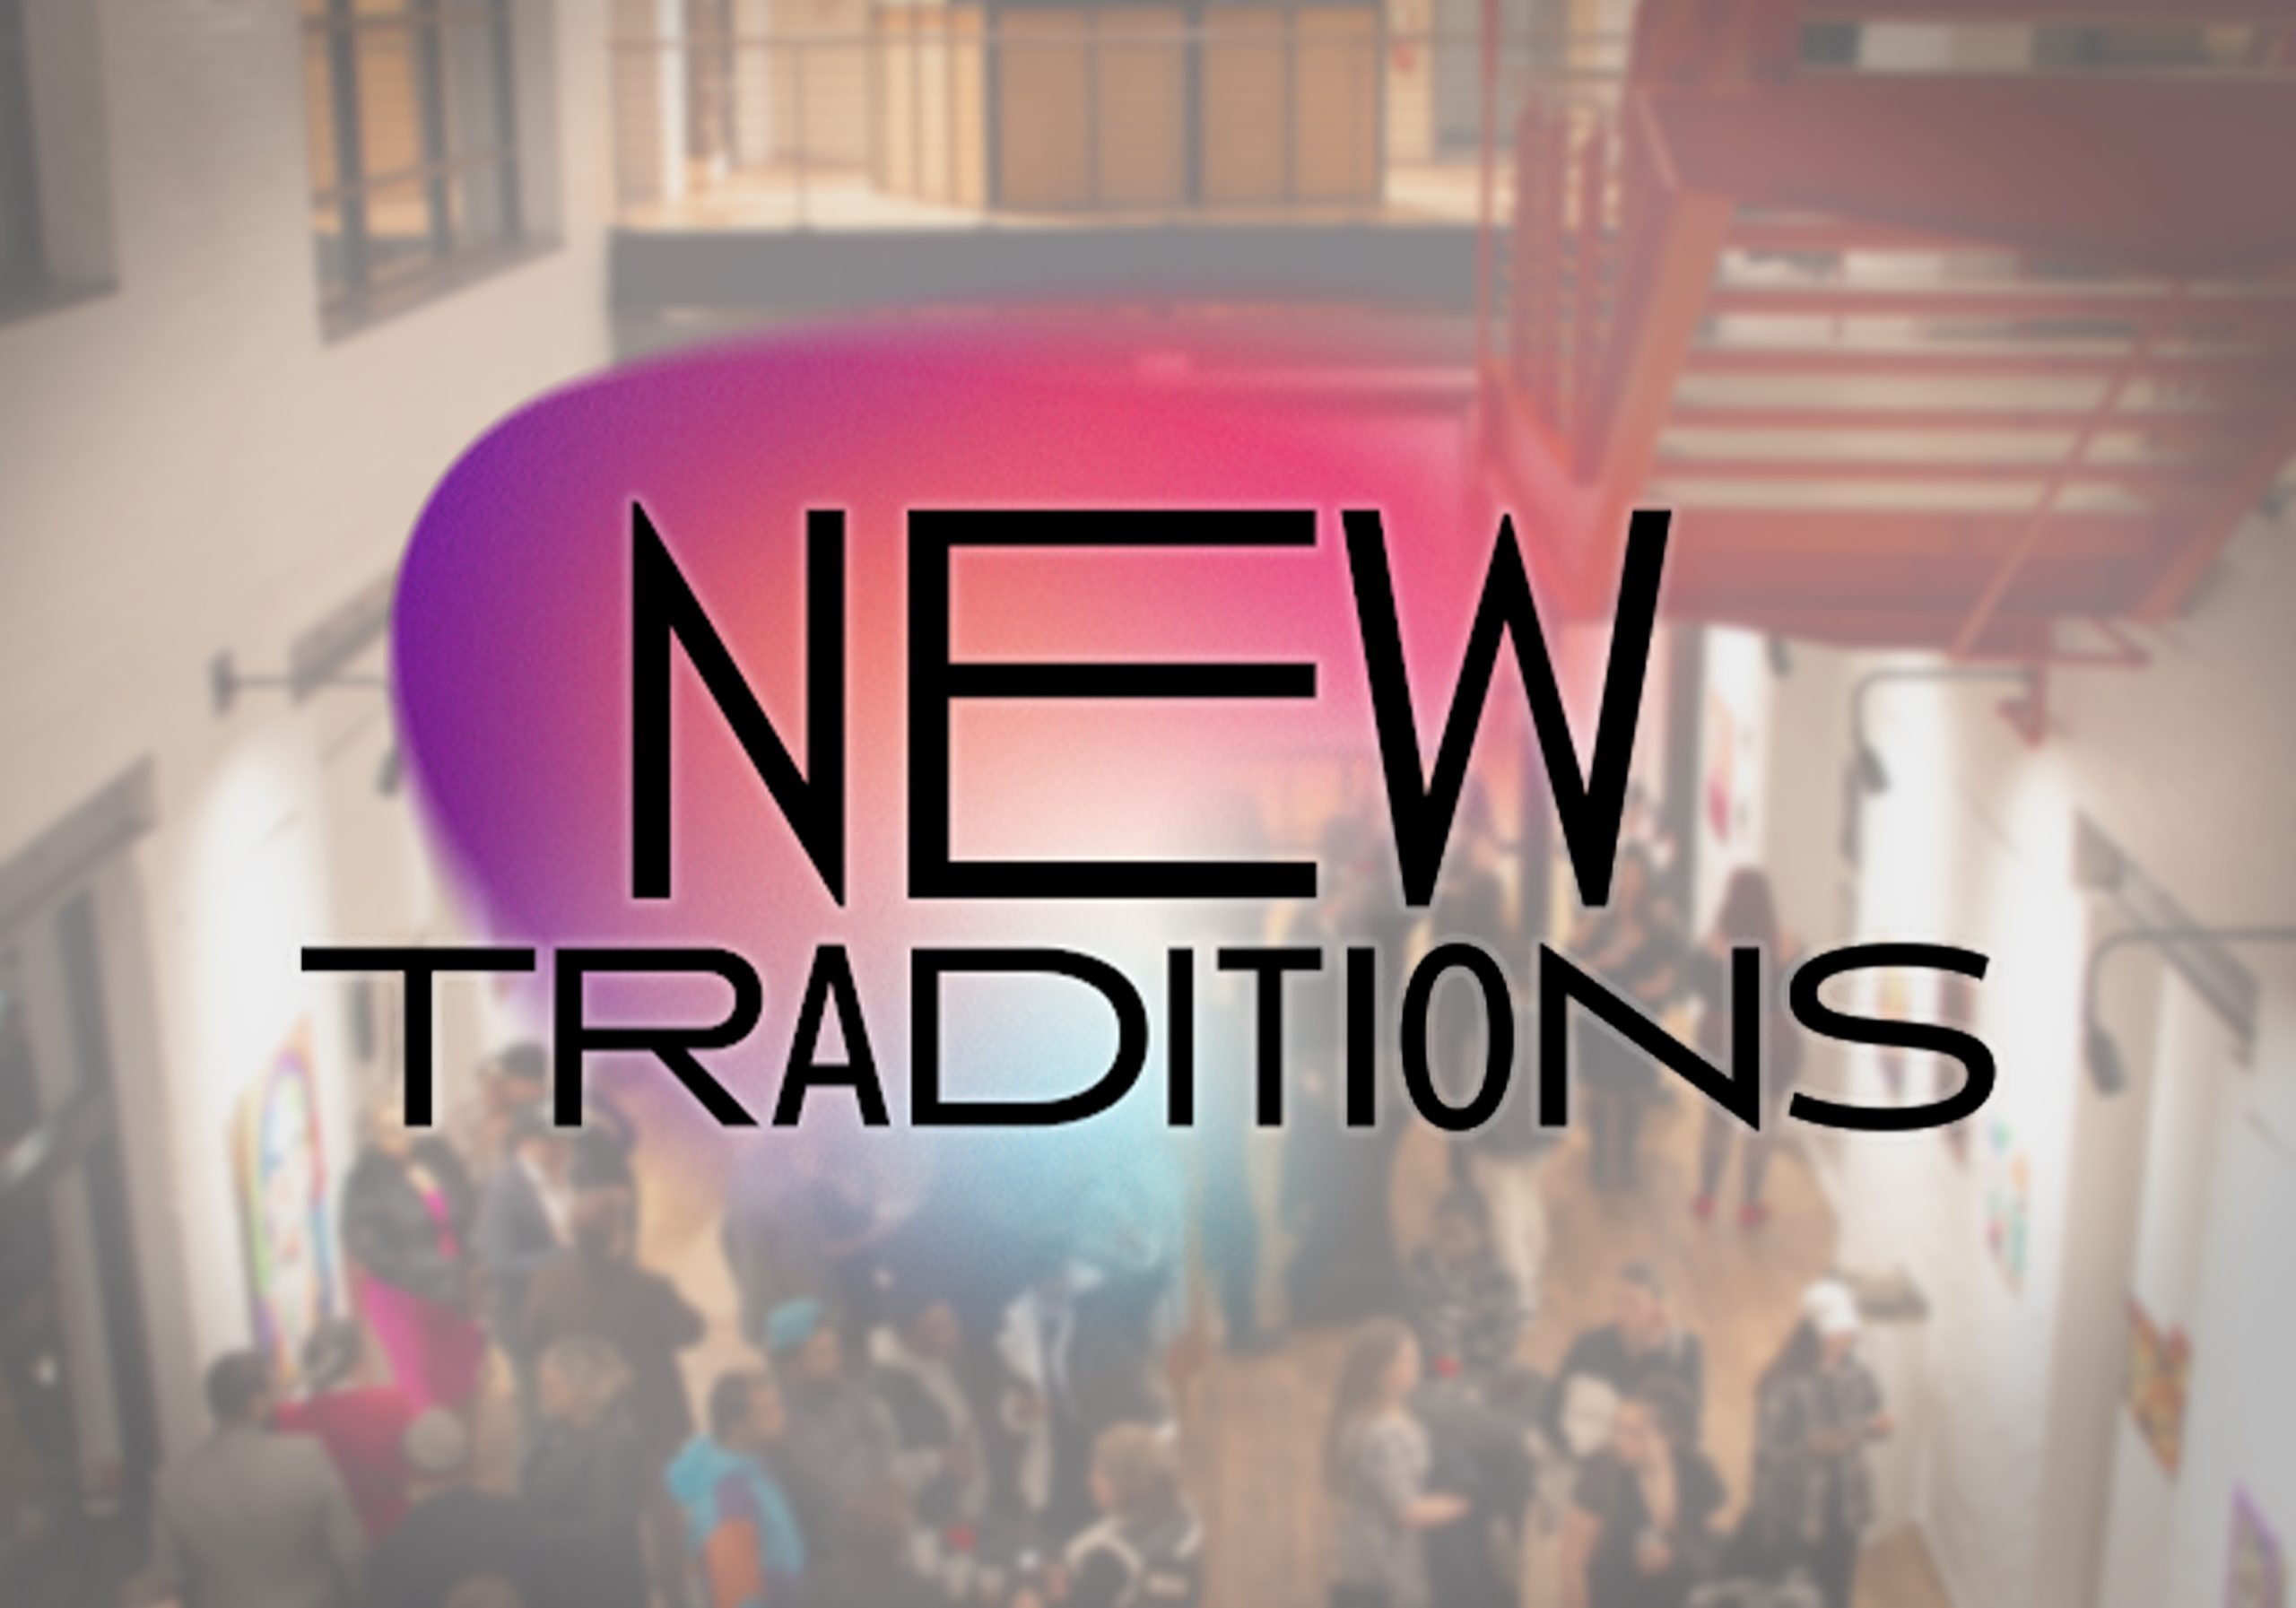 “New Traditions” Exhibit: Bridging Appalachia’s Past and Present Through Art